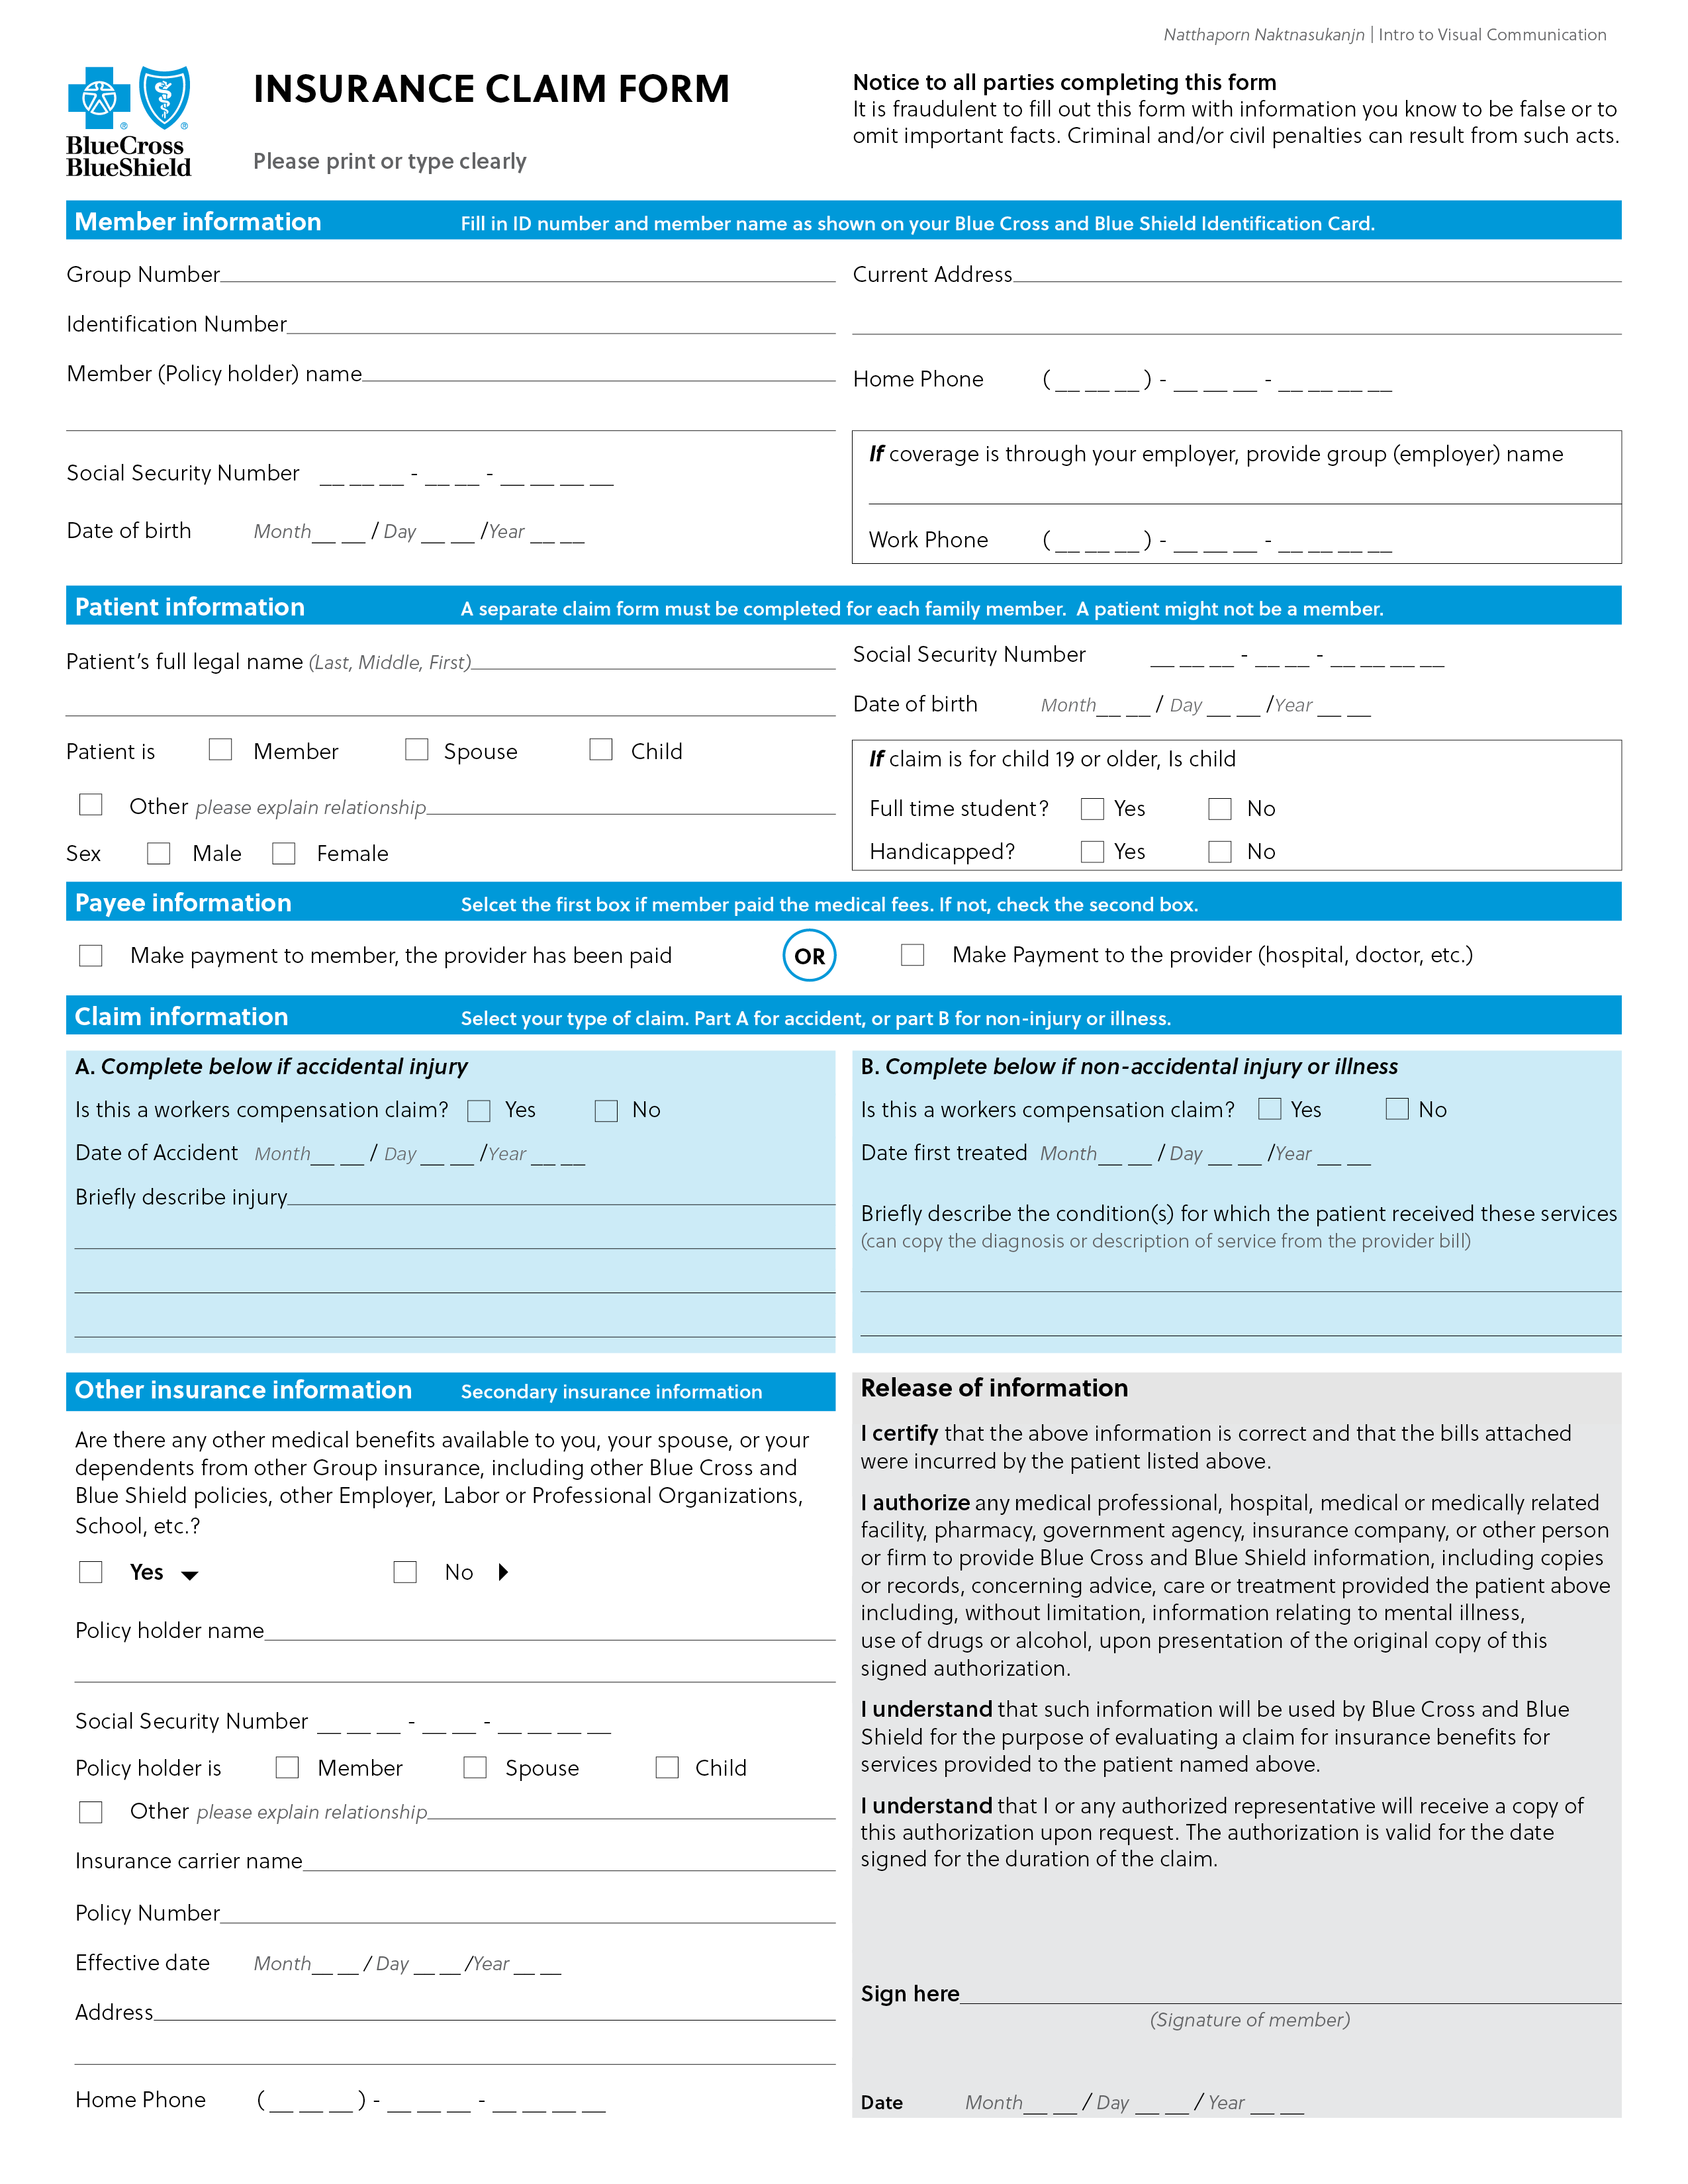 Redesigned Insurance Claim Form